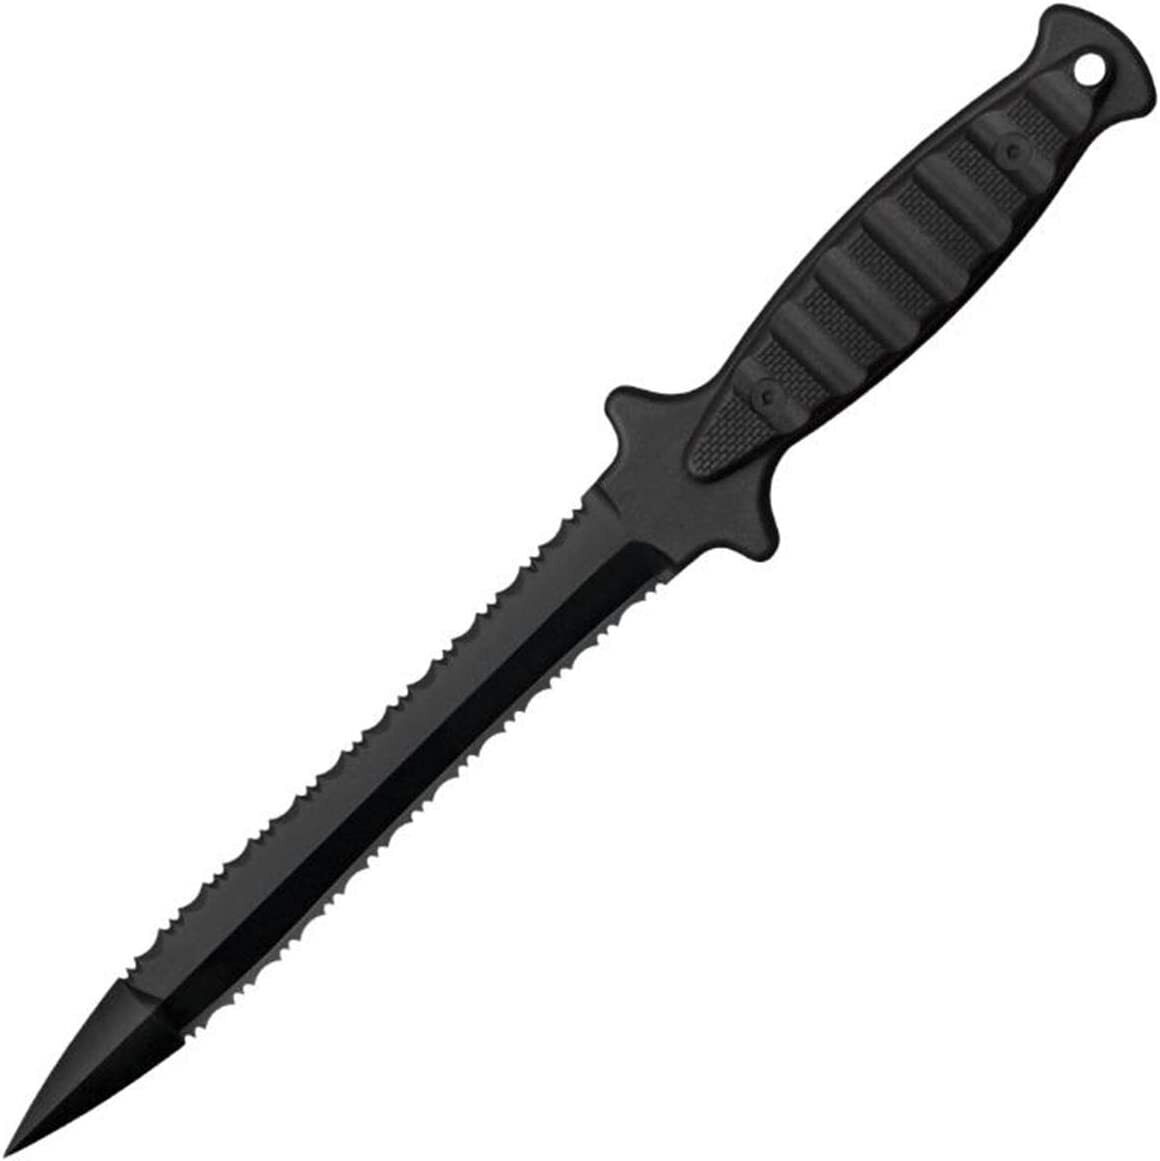 Cold Steel FGX Nightshade Series Knife - Made of Griv-Ex Fiberglass-Reinforced